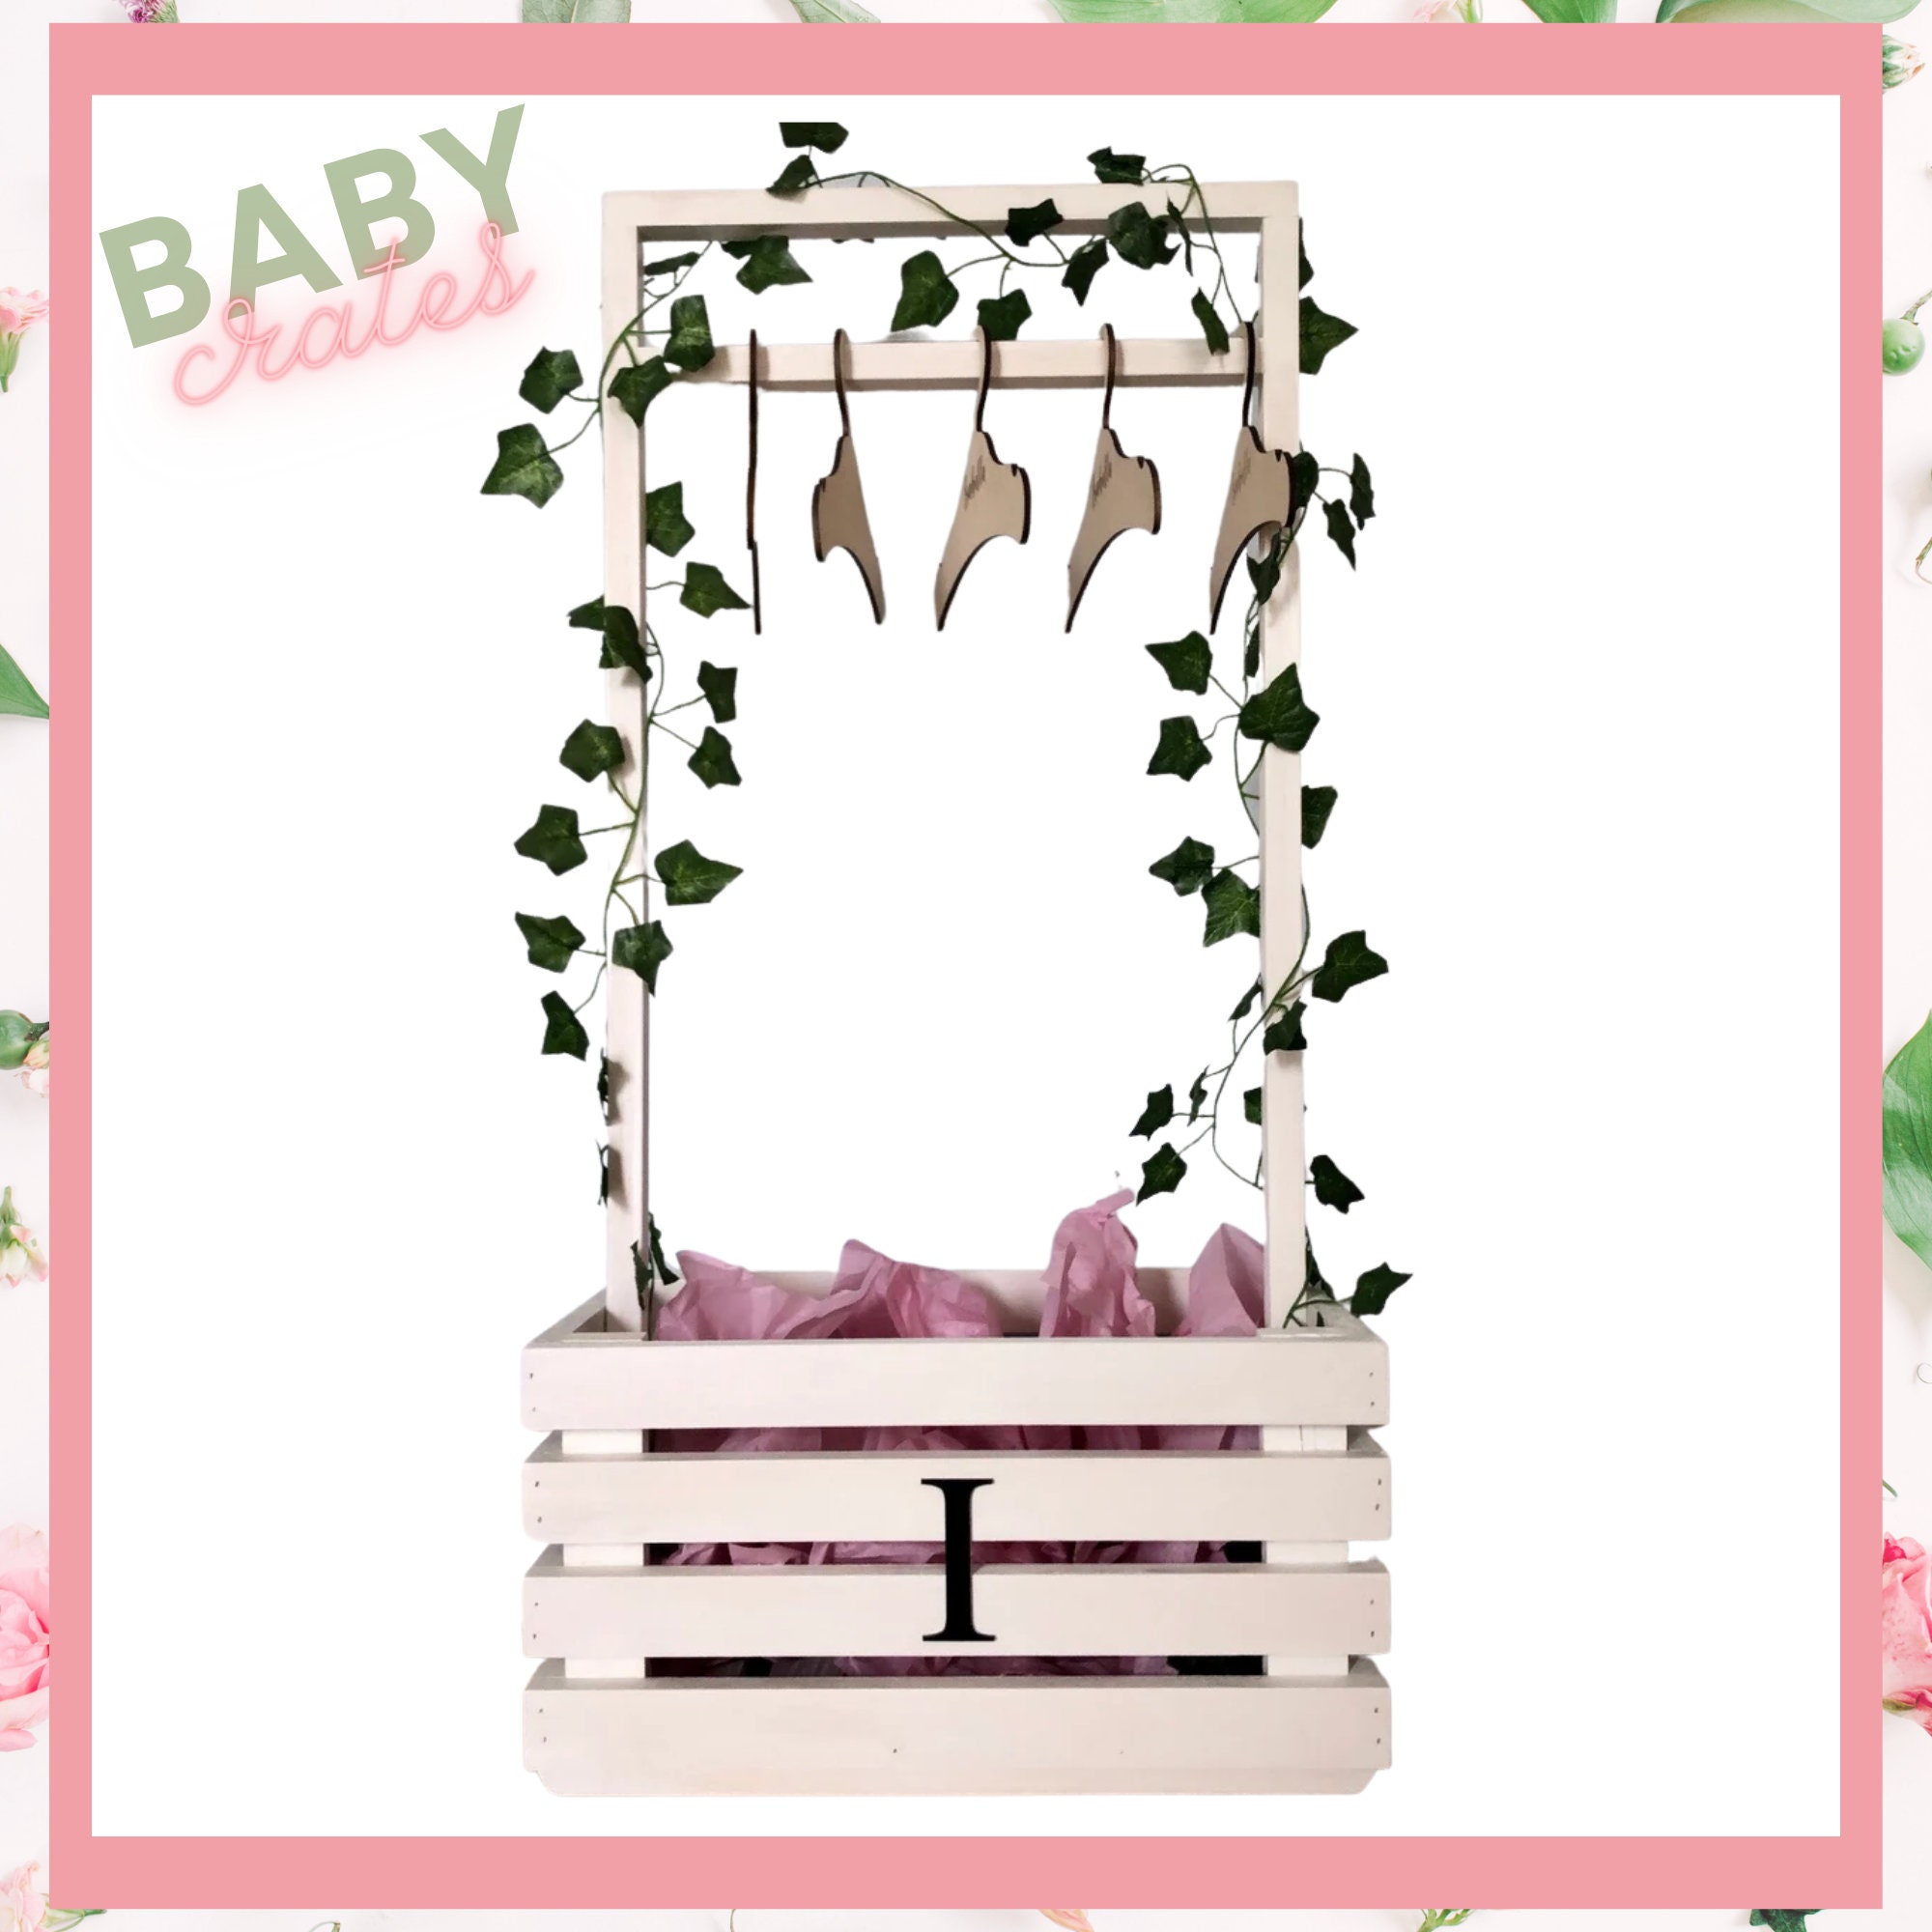 Baby shower gift: decorated a large box with outfits hanging on a  clothesline. Easy and fun pr…